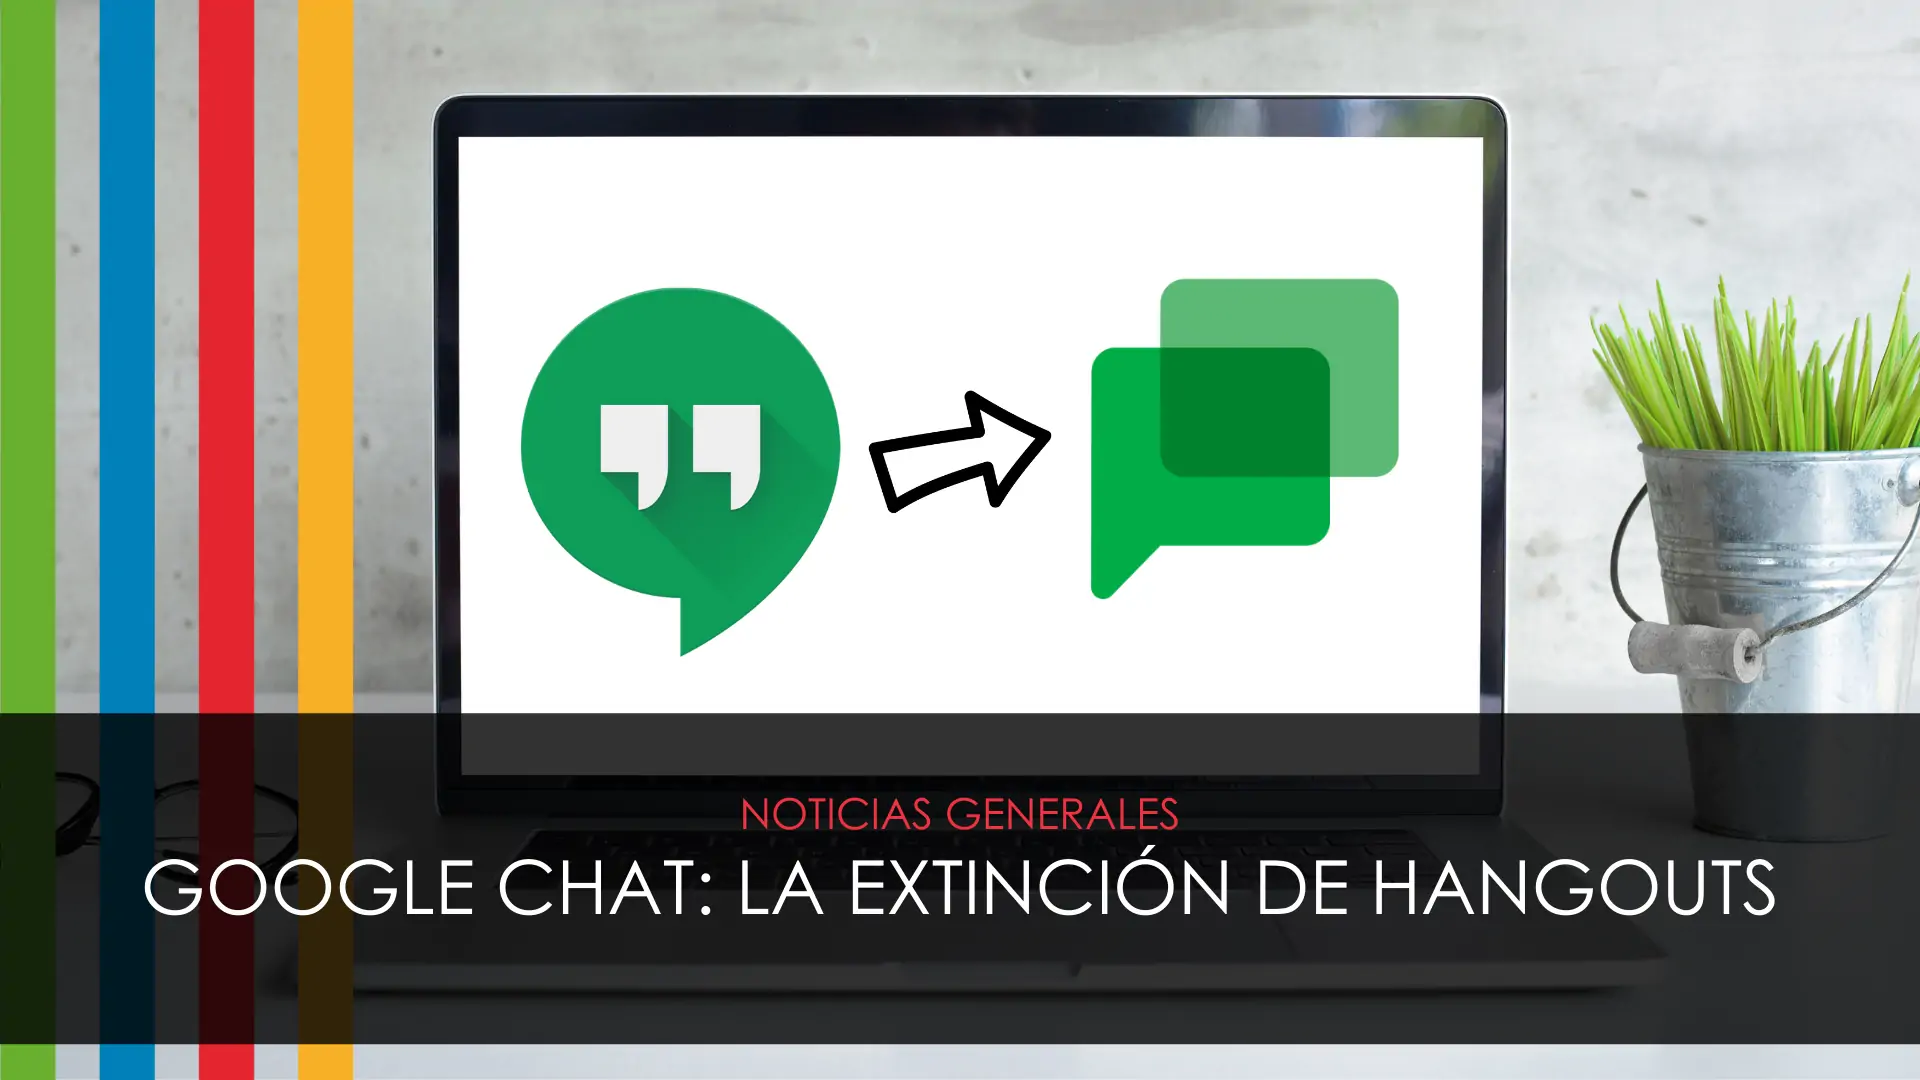 Google Chat: the extinction of Hangouts